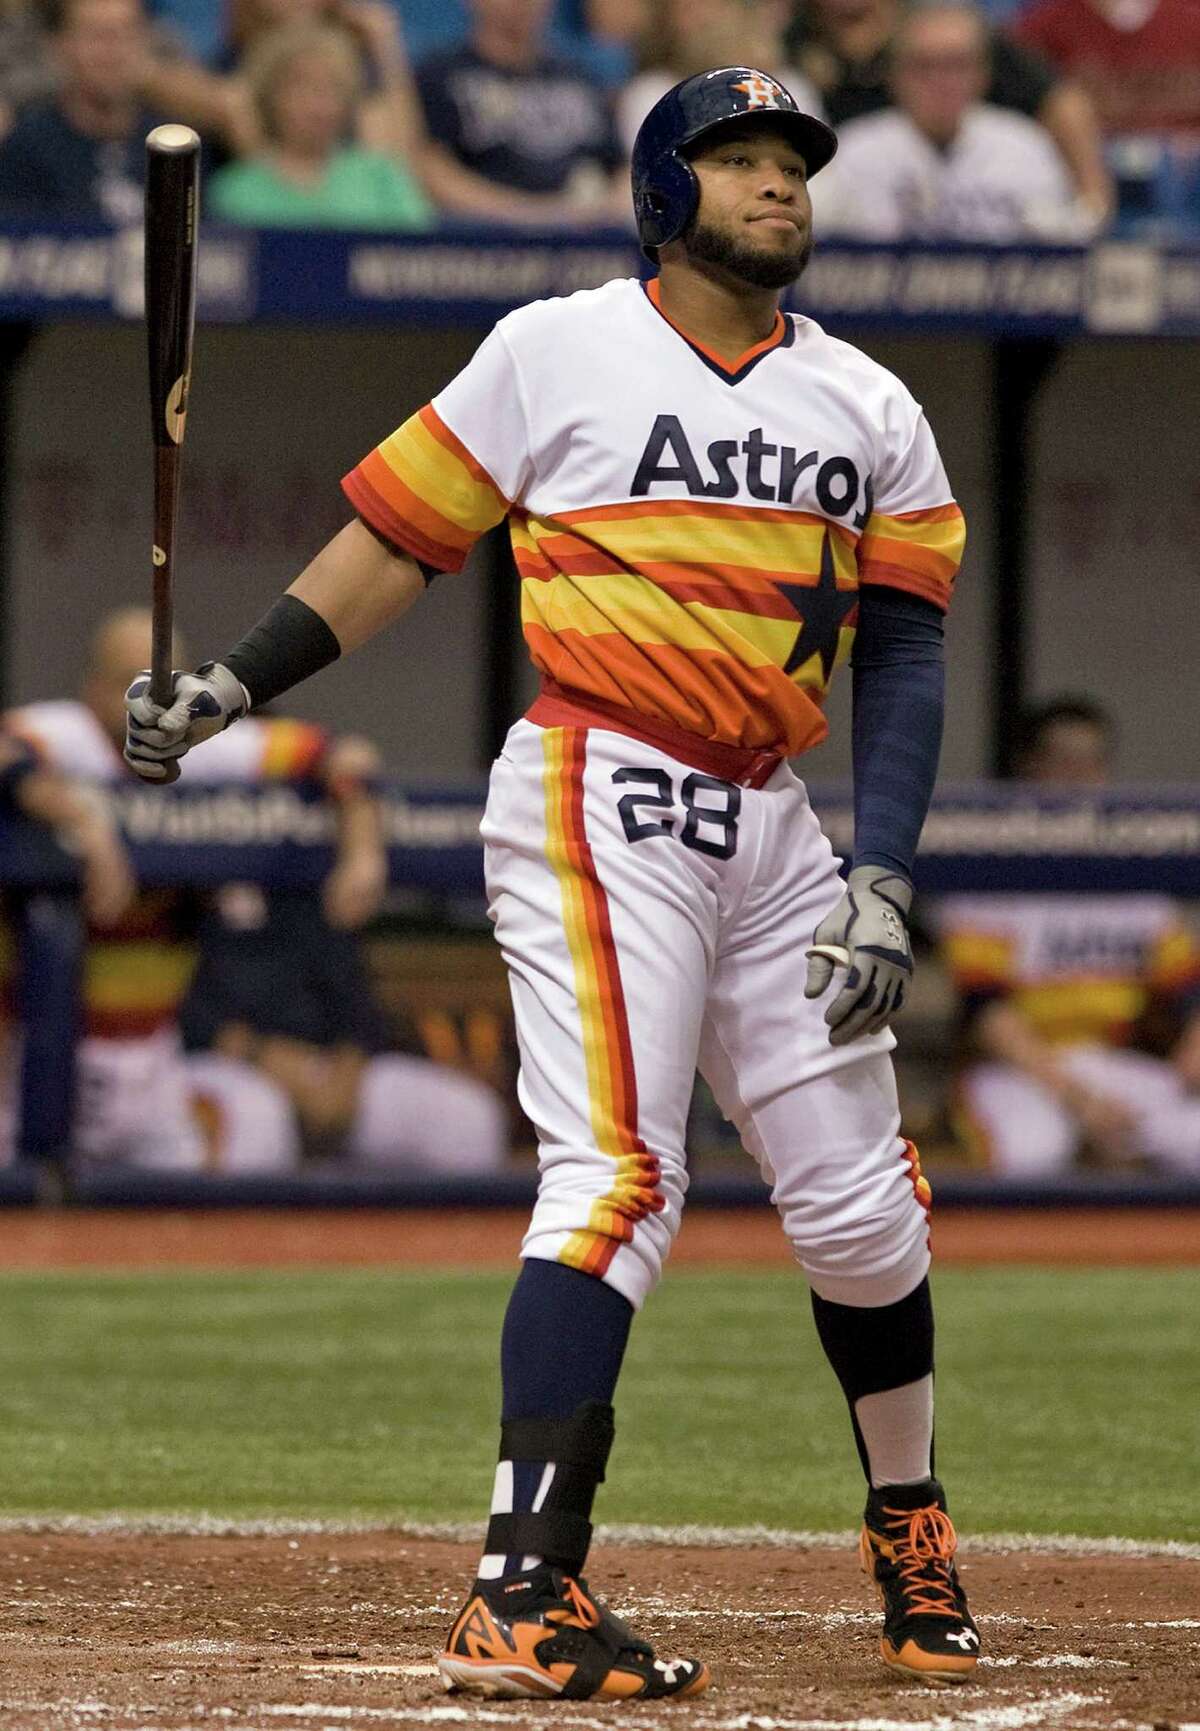 Trip's ugly averages spread like epidemic for Astros